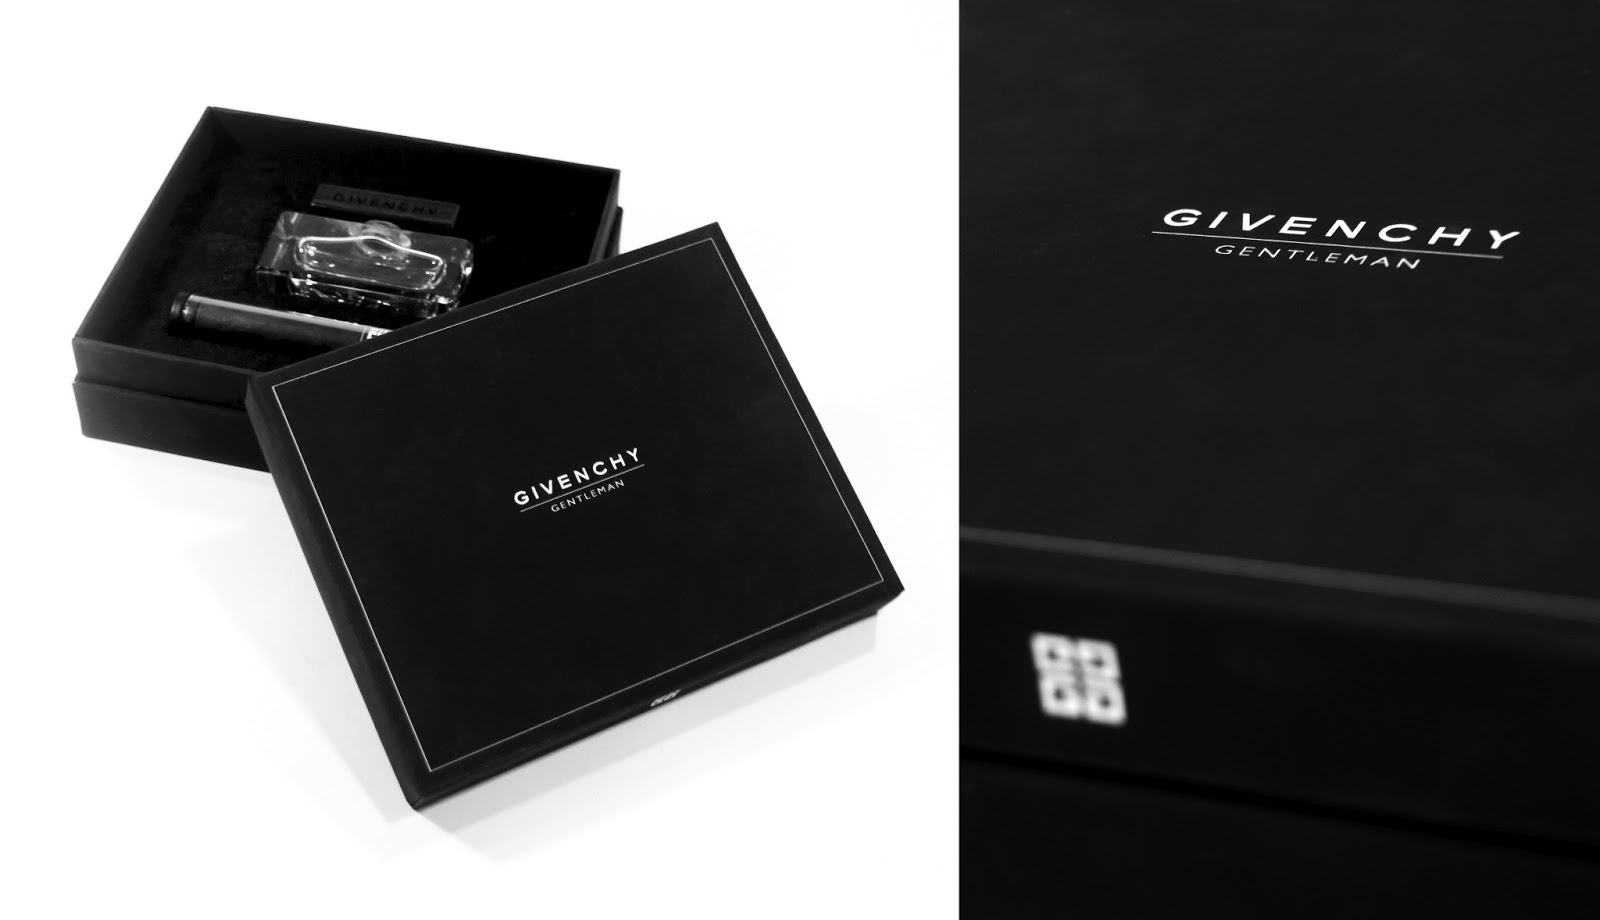 Givenchy Gentleman Fragrance Redesign (Student Project) on ... older fuse box 